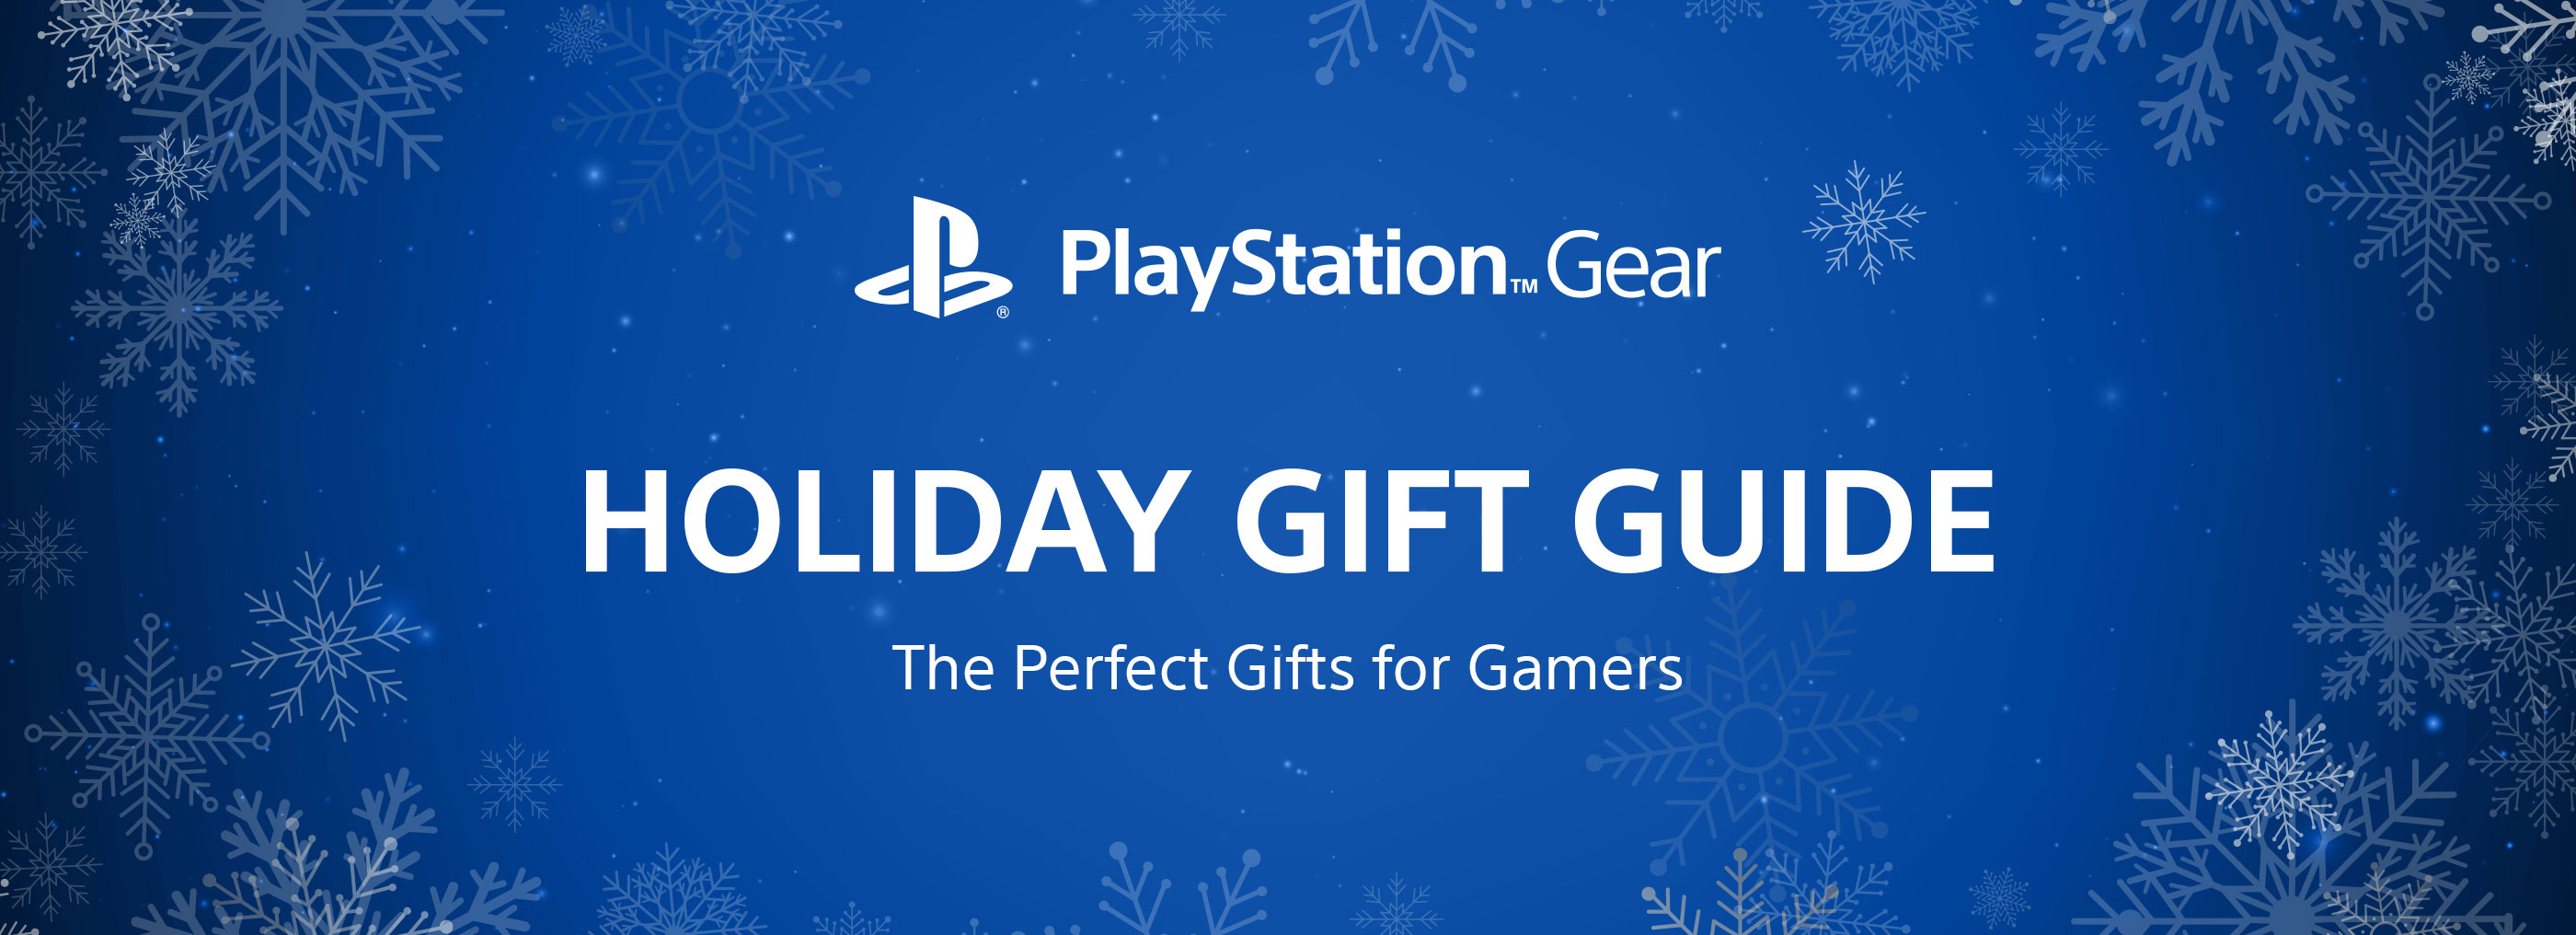 Find the Perfect Gifts for Gamers at PlayStation Gear!